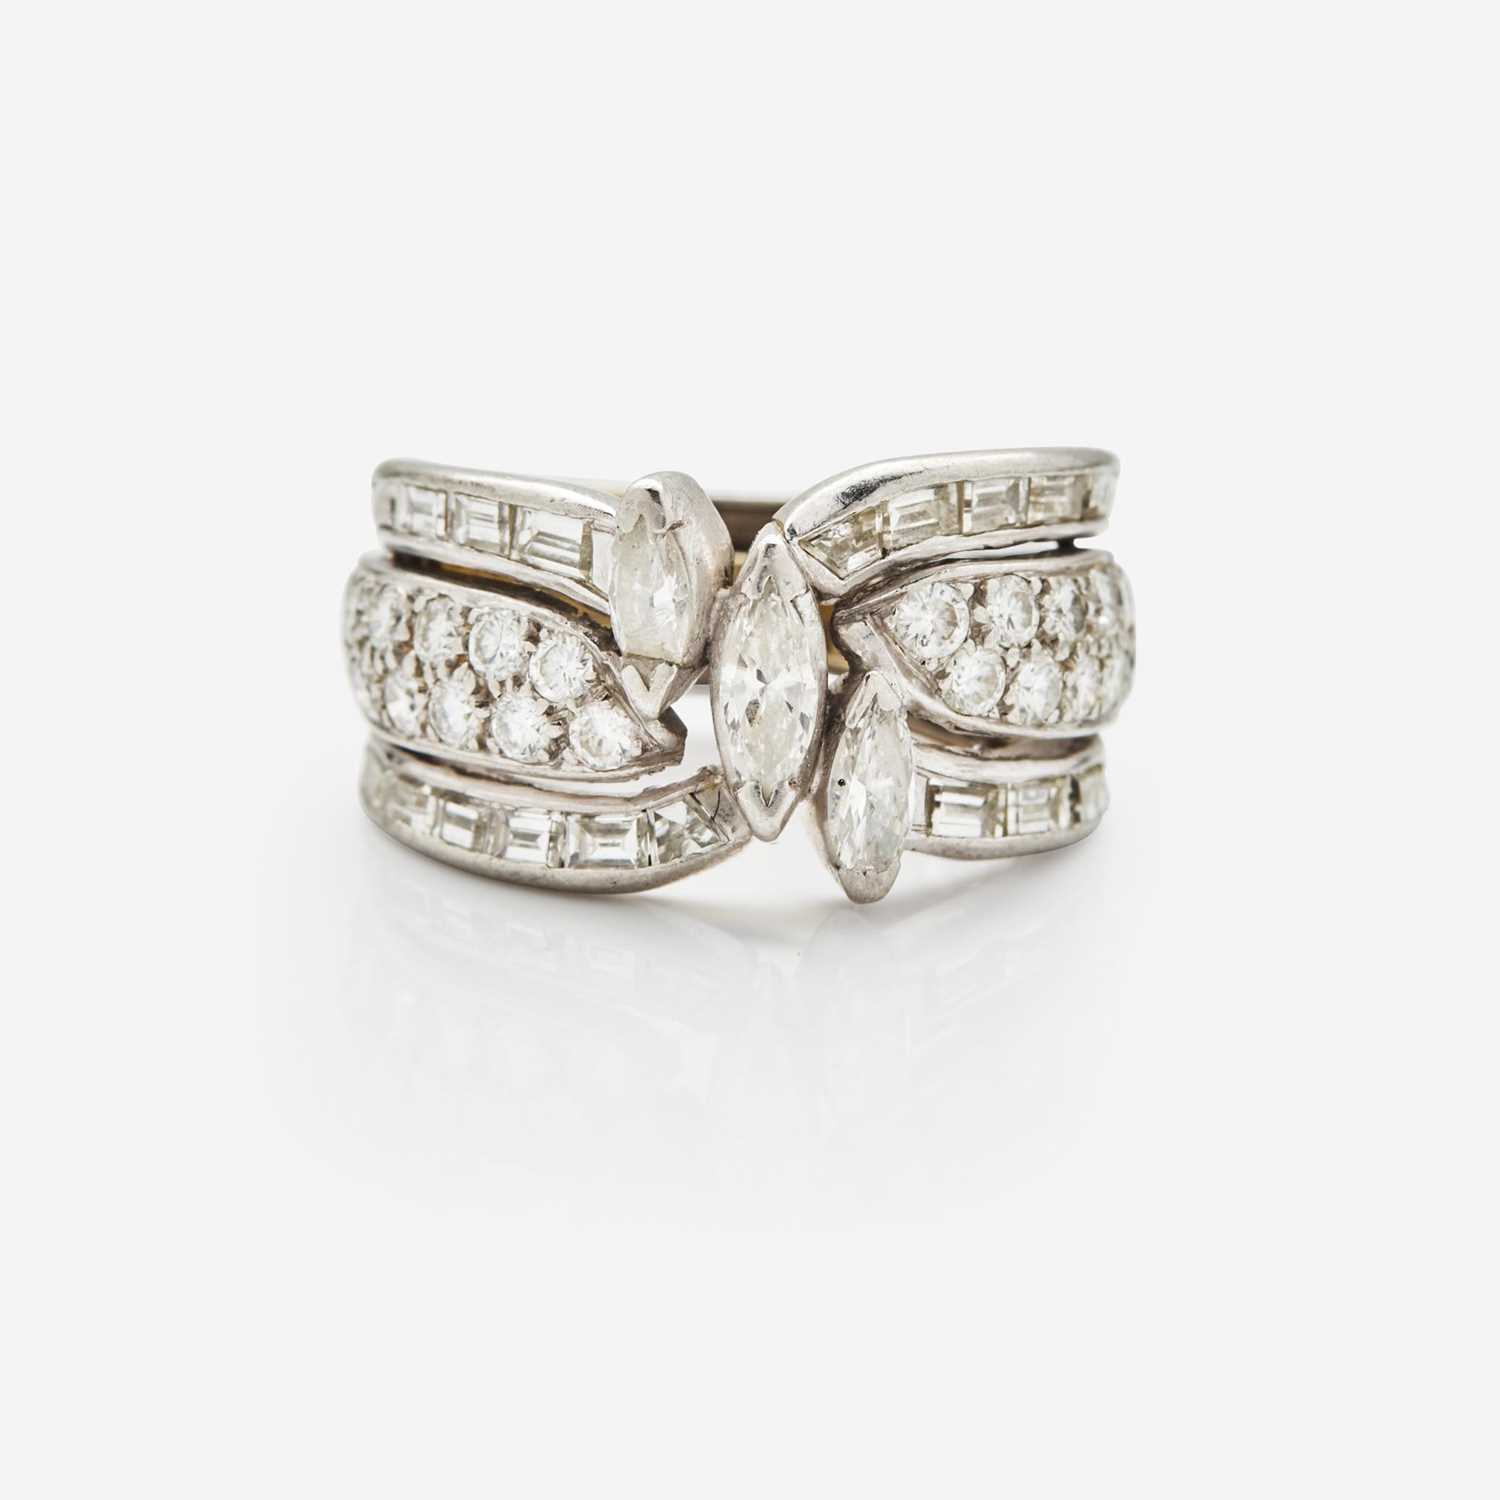 Lot 73 - A Ladies 18K White Gold and Diamond Ring